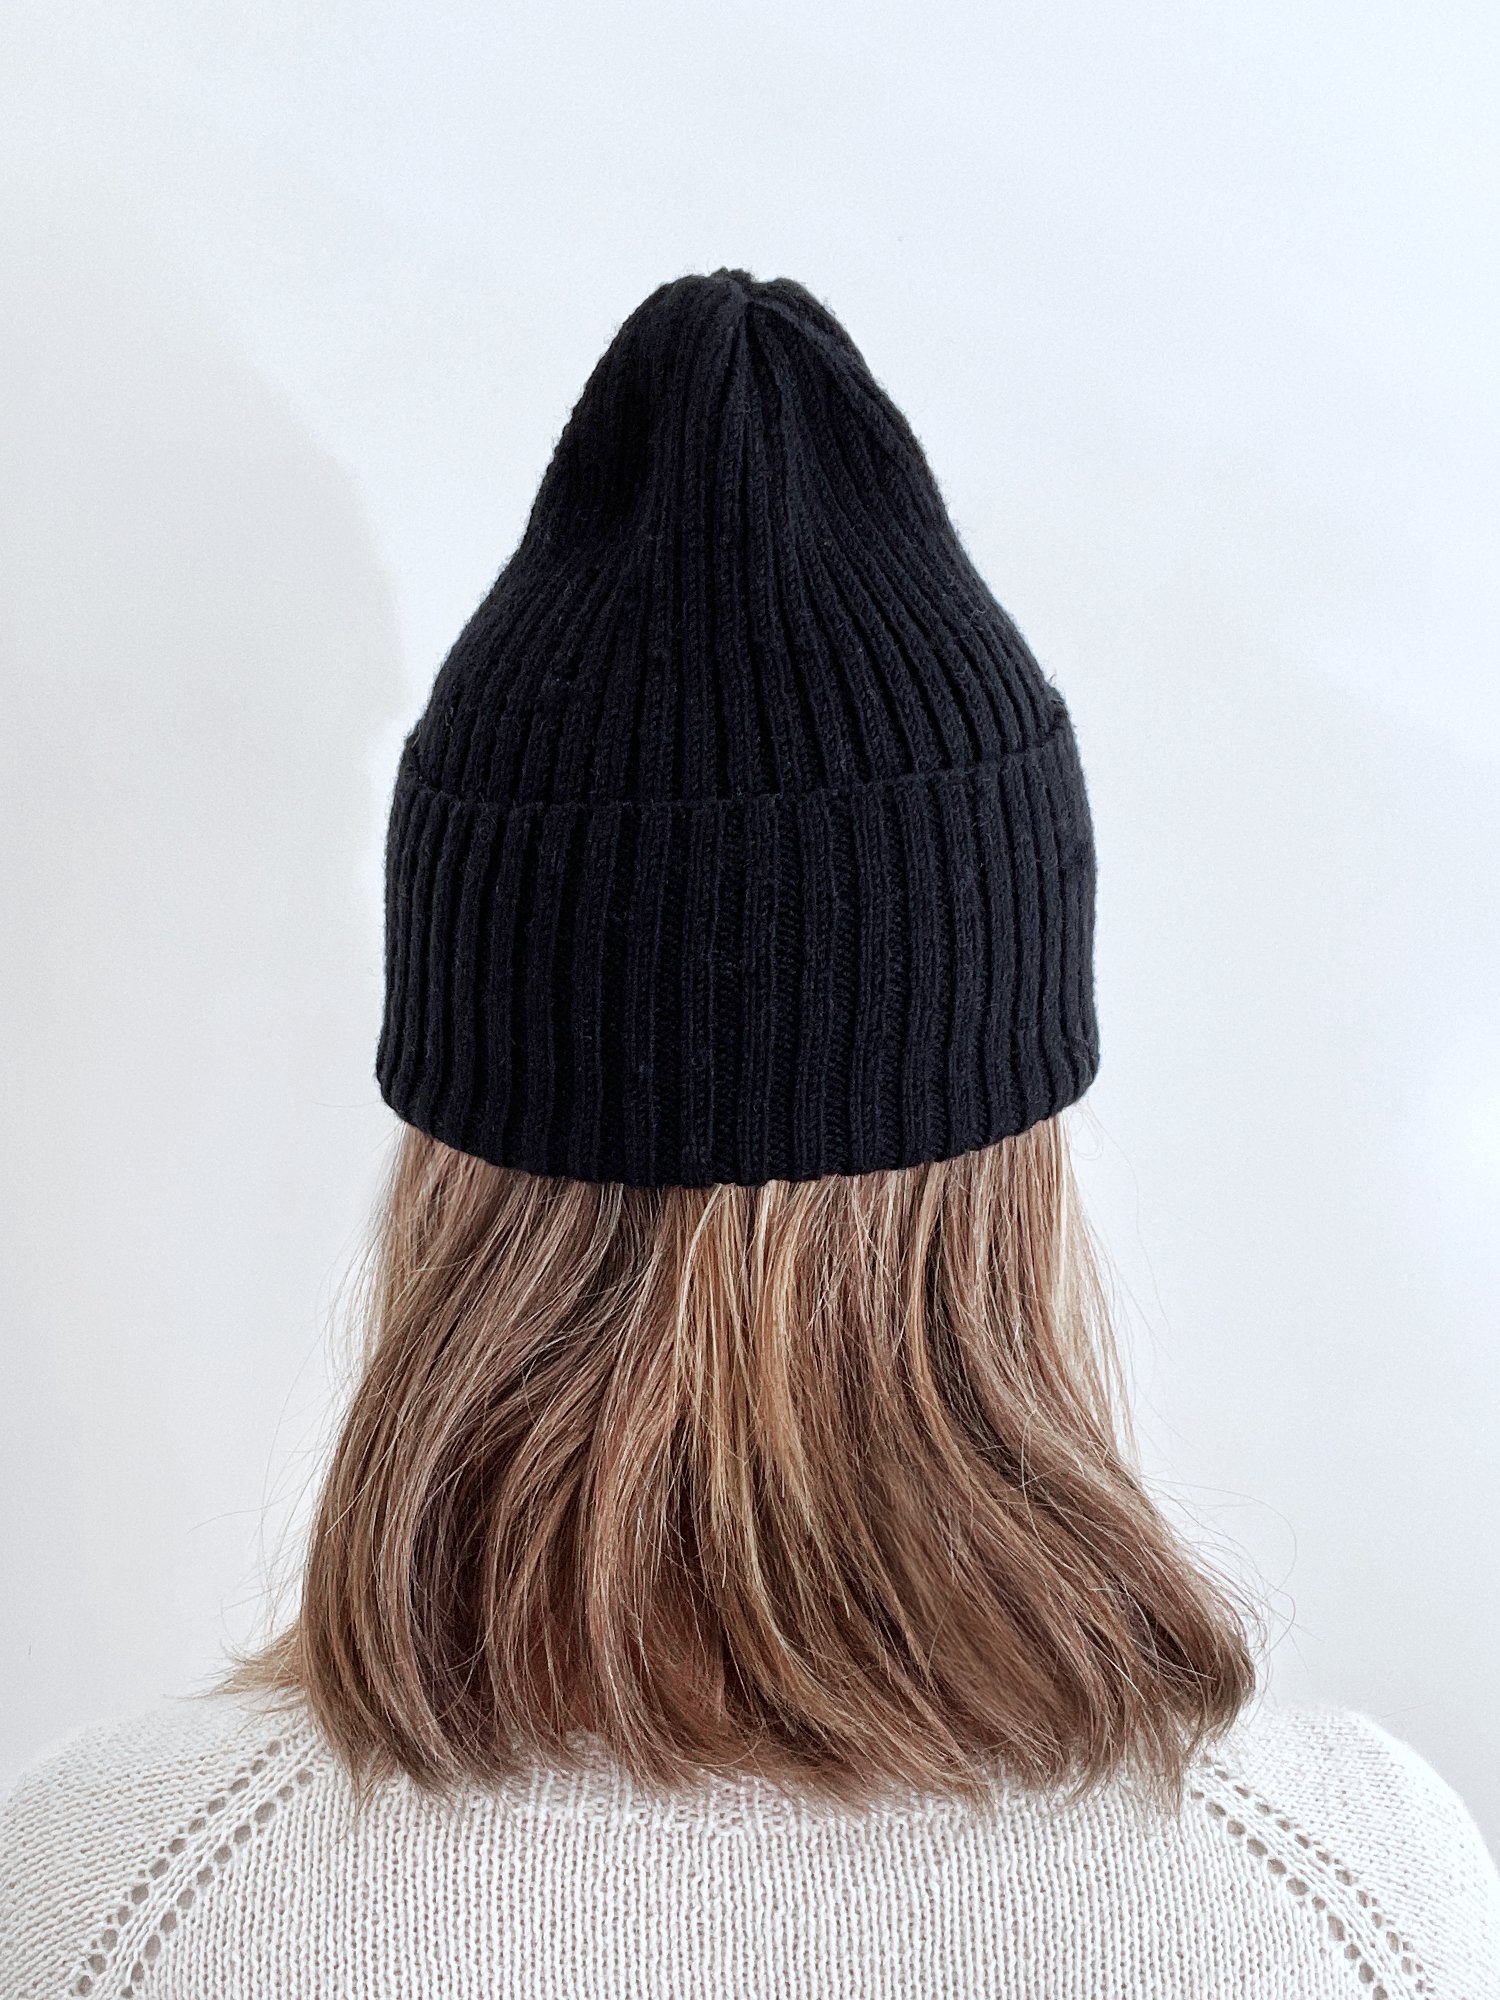 The Basic Double Rib Beanie knitting pattern in 4 yarn weights